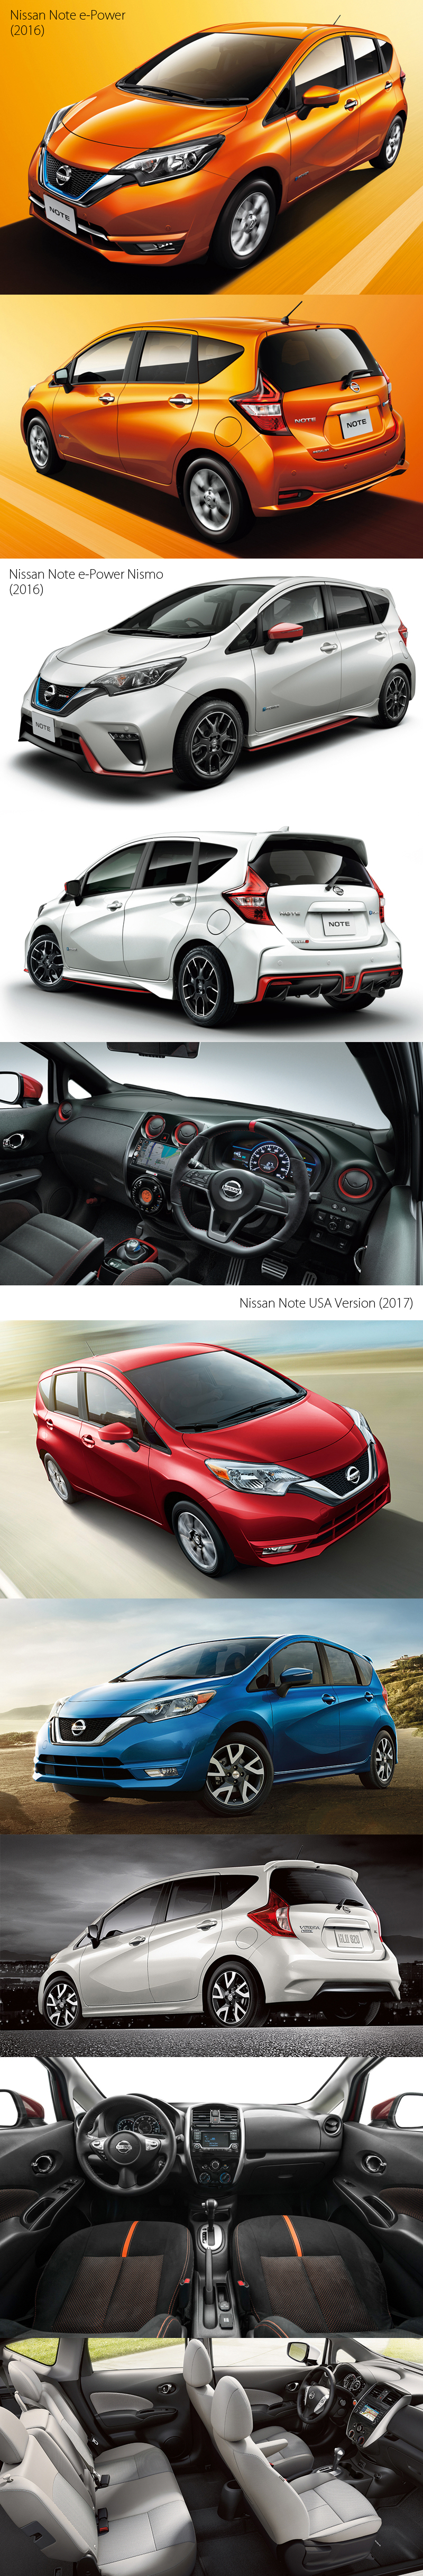 2017_Nissan_Note